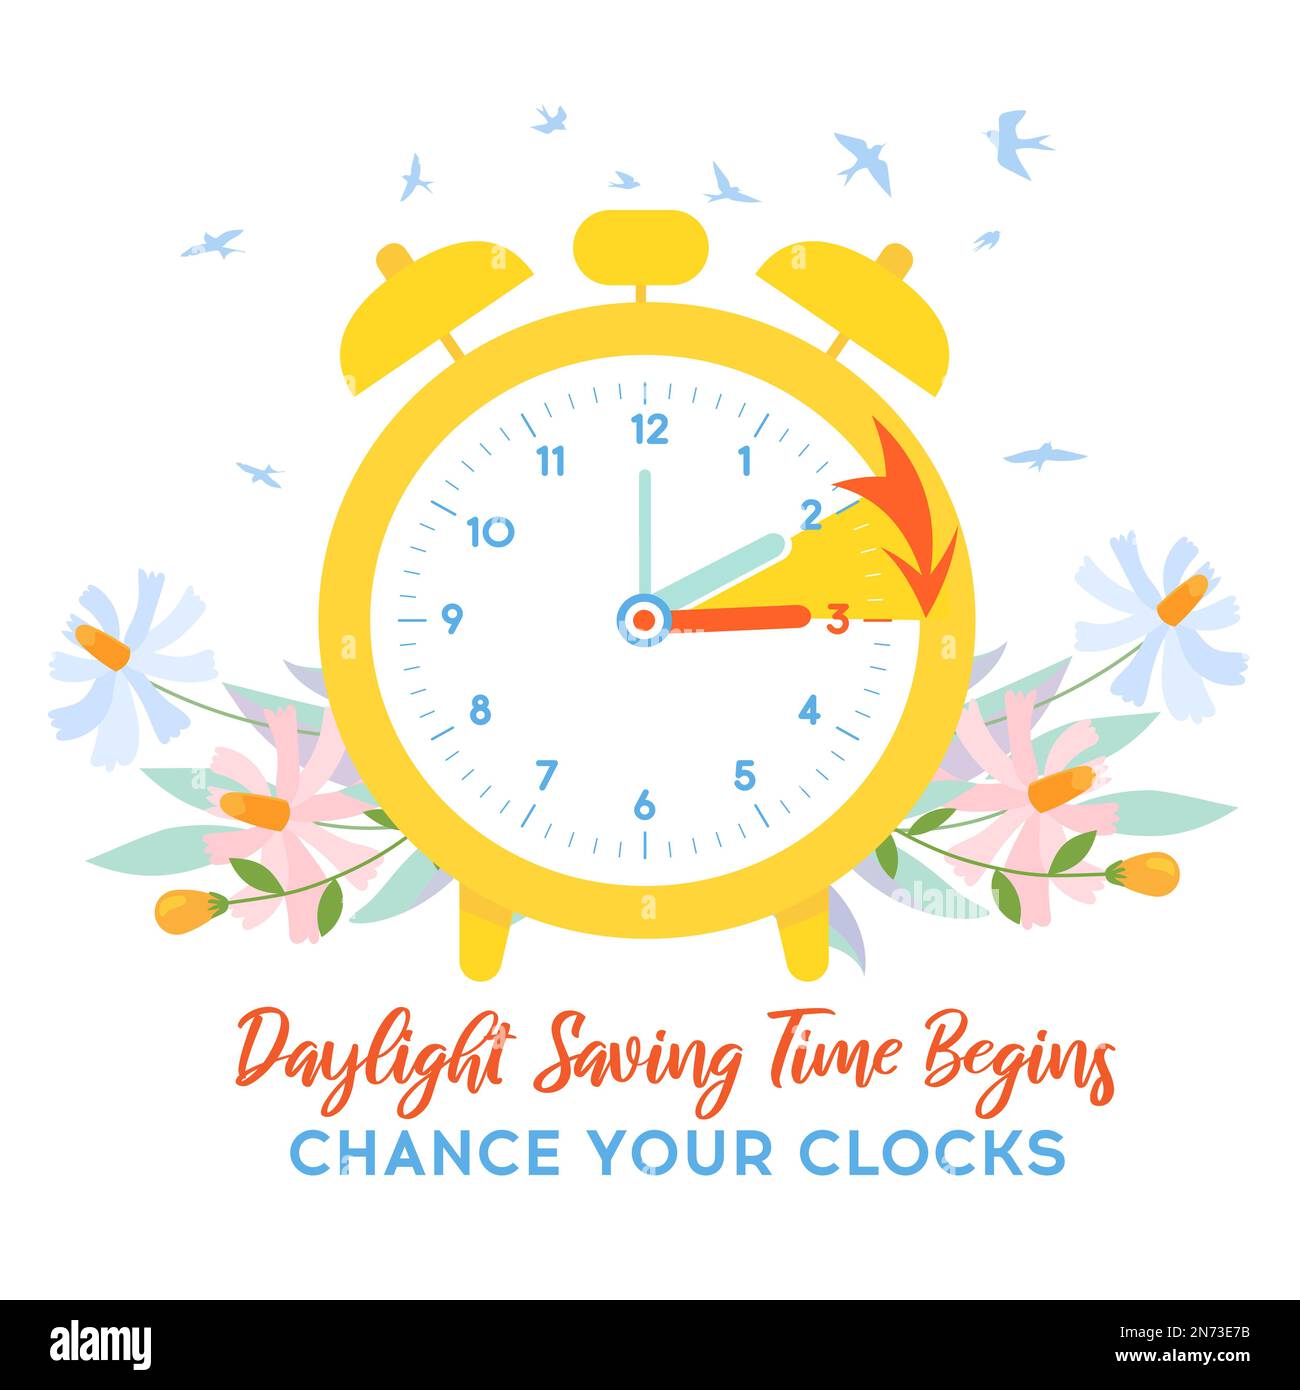 Daylight Saving Time Begins banner. Spring Forward. Guide banner with